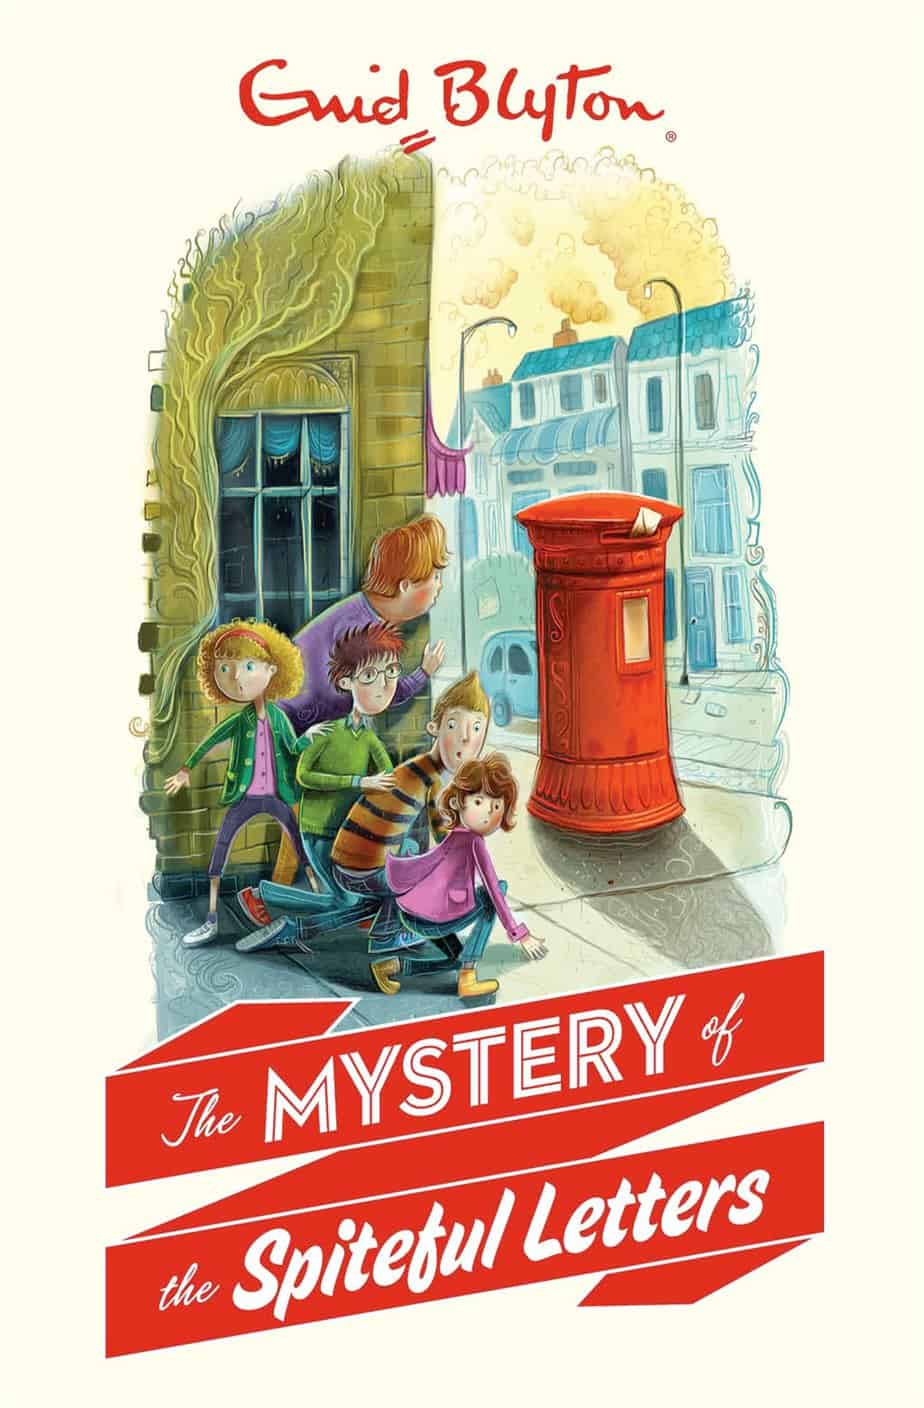 The Mystery of the Spiteful Letters by Enid Blyton modern paperback